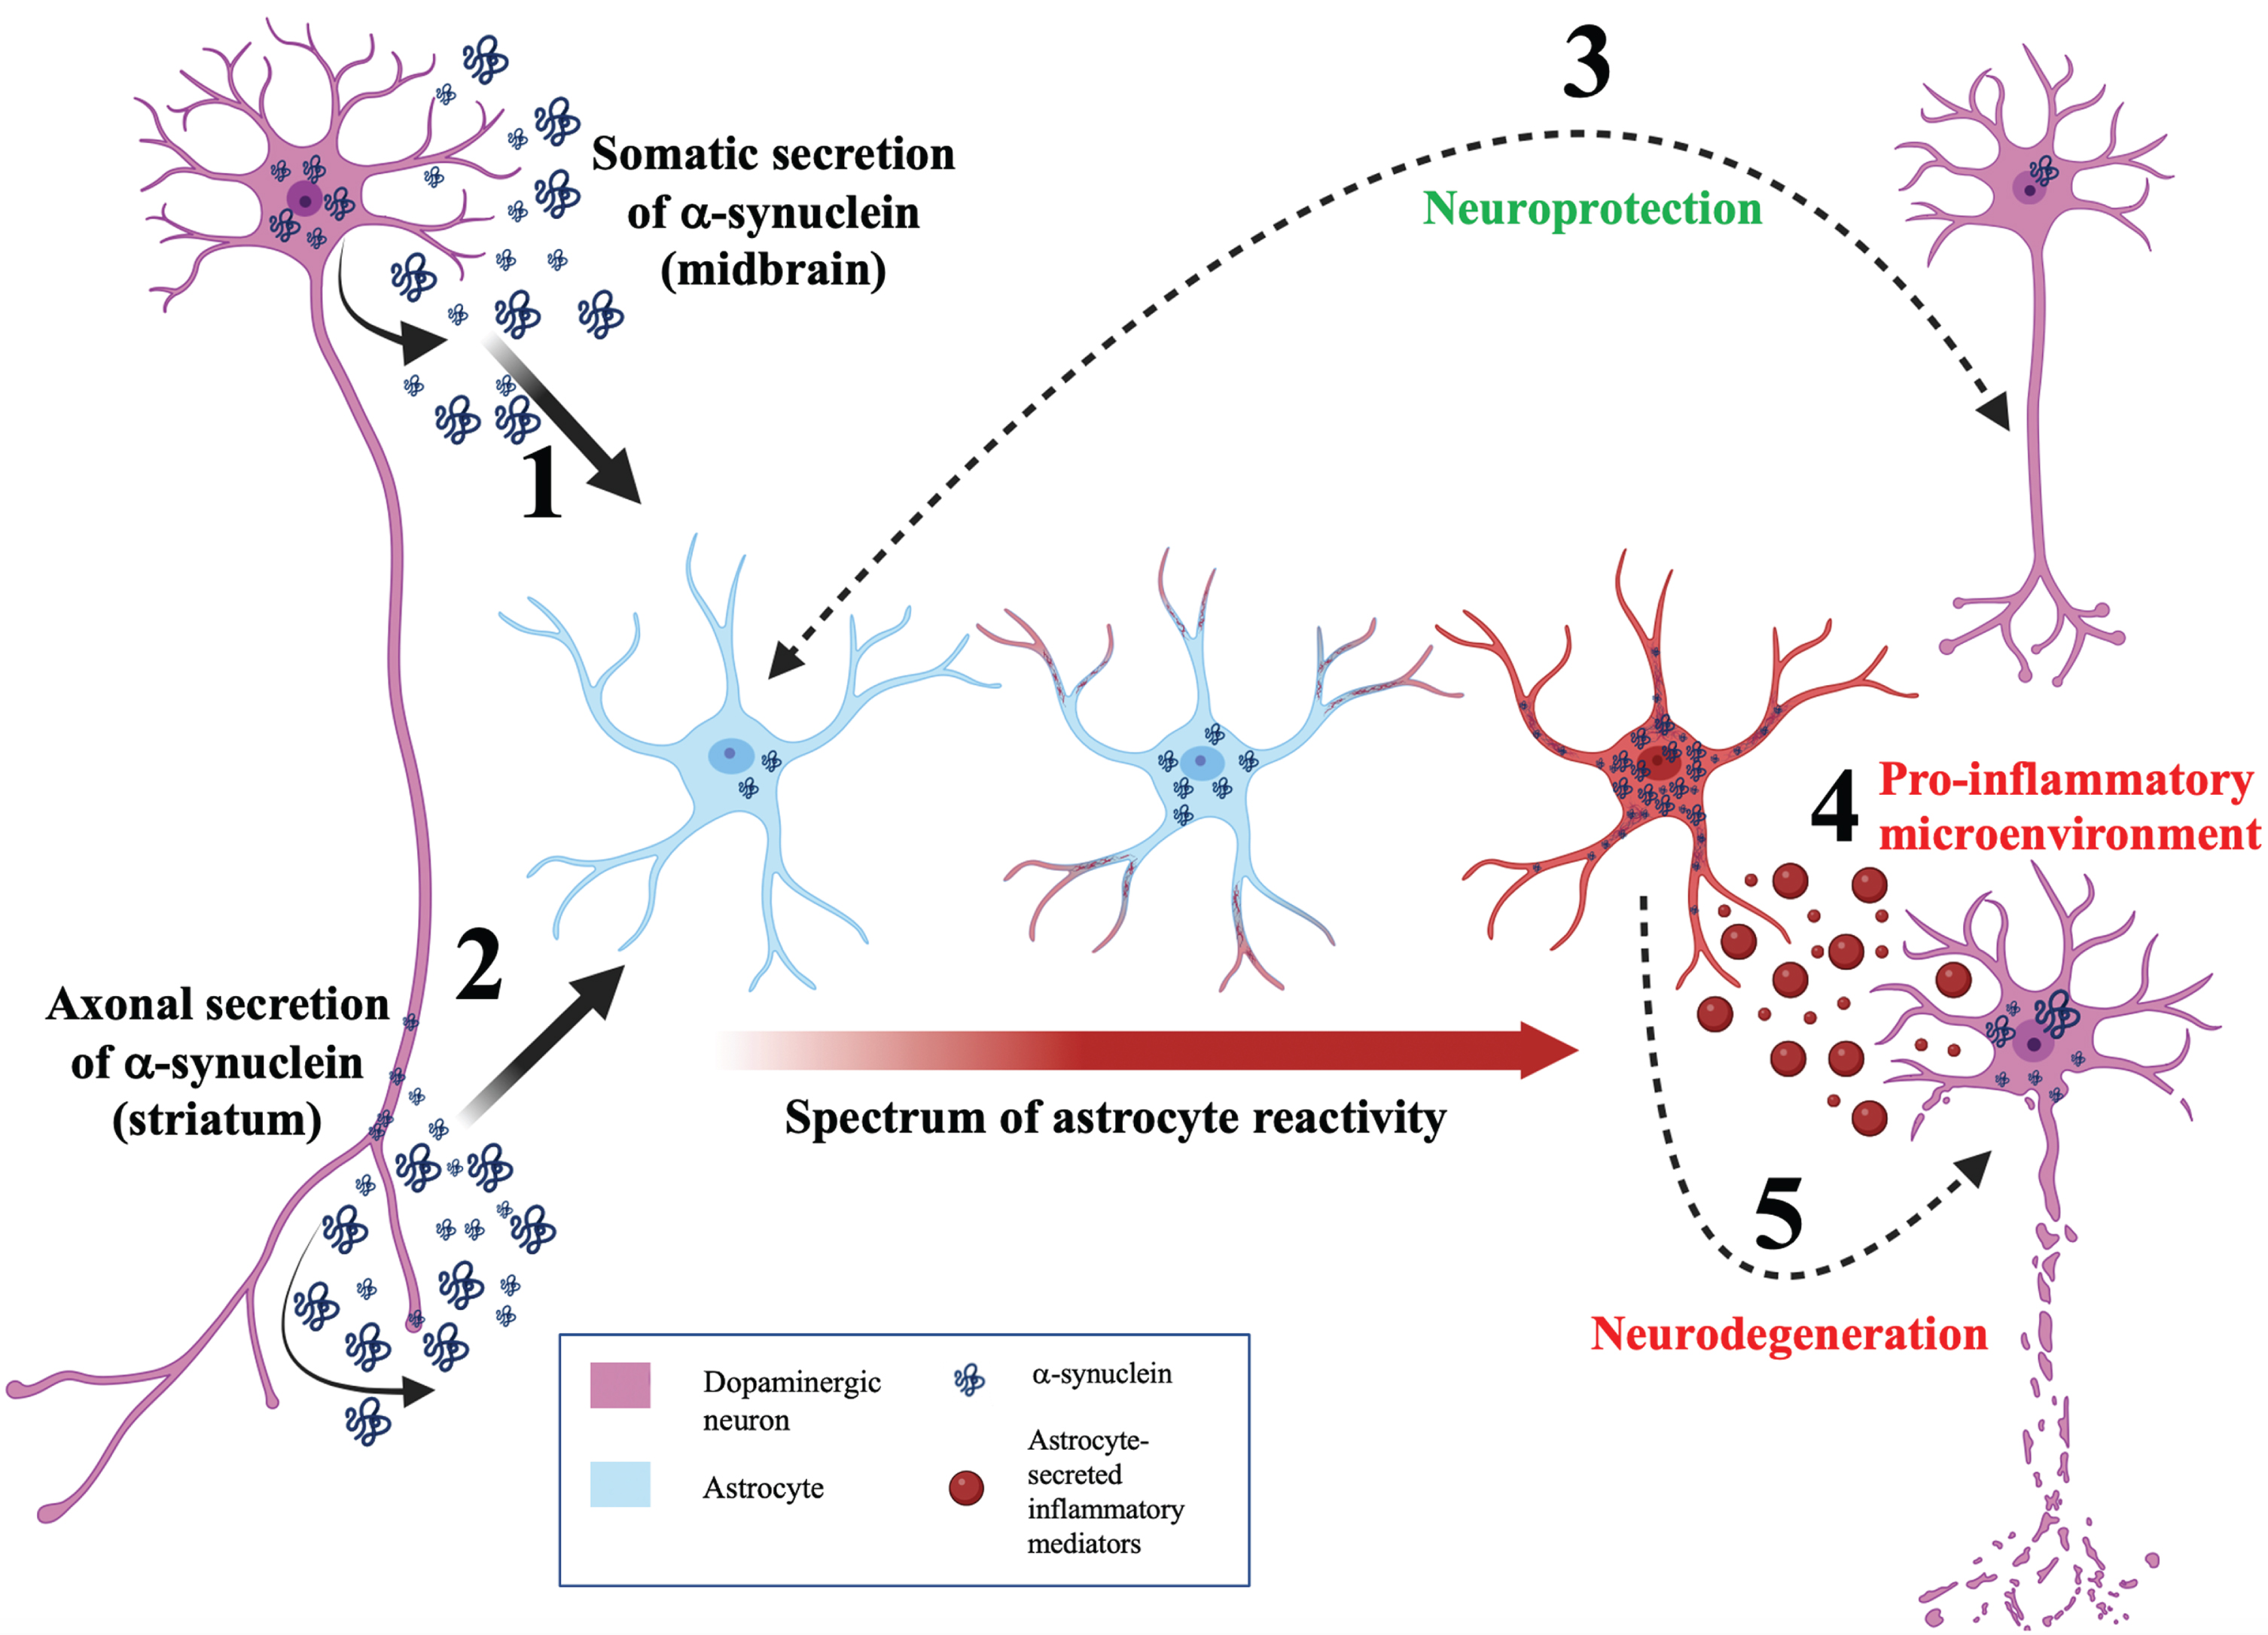 A neuroinflammatory model for astrocytic α-synuclein determining the balance between neuroprotection and neurodegeneration. Model schematic depicting a neuroinflammatory role for astrocytes in maintaining the balance between neuroprotection and neurodegeneration during PD. (1) α-synuclein is secreted by the soma of neurons and internalized by astrocytes. This somatodendritic neuron-astrocyte coupling may be seen in the midbrain. (2) α-synuclein is externalized by the axon of neurons and internalized by astrocytes. This morphological coupling may be seen in the striatum. (3) Bidirectional, efficient transfer of α-synuclein between astrocytes and neurons facilitates neuroprotection. (4) Aberrant α-synuclein accumulation induces astrocyte reactivity. Depending on the load of α-synuclein in the astrocyte, astrocyte reactivity can range from mild (blue astrocyte) to moderate (astrocyte with red process tips) to severe reactivity (red astrocyte). (5) Highly reactive astrocytes will secrete cytokines (red vesicles) resulting in a pro-inflammatory microenvironment and consequent neurodegeneration. In addition, transfer of α-synuclein from astrocytes to neurons can induce neurodegeneration.